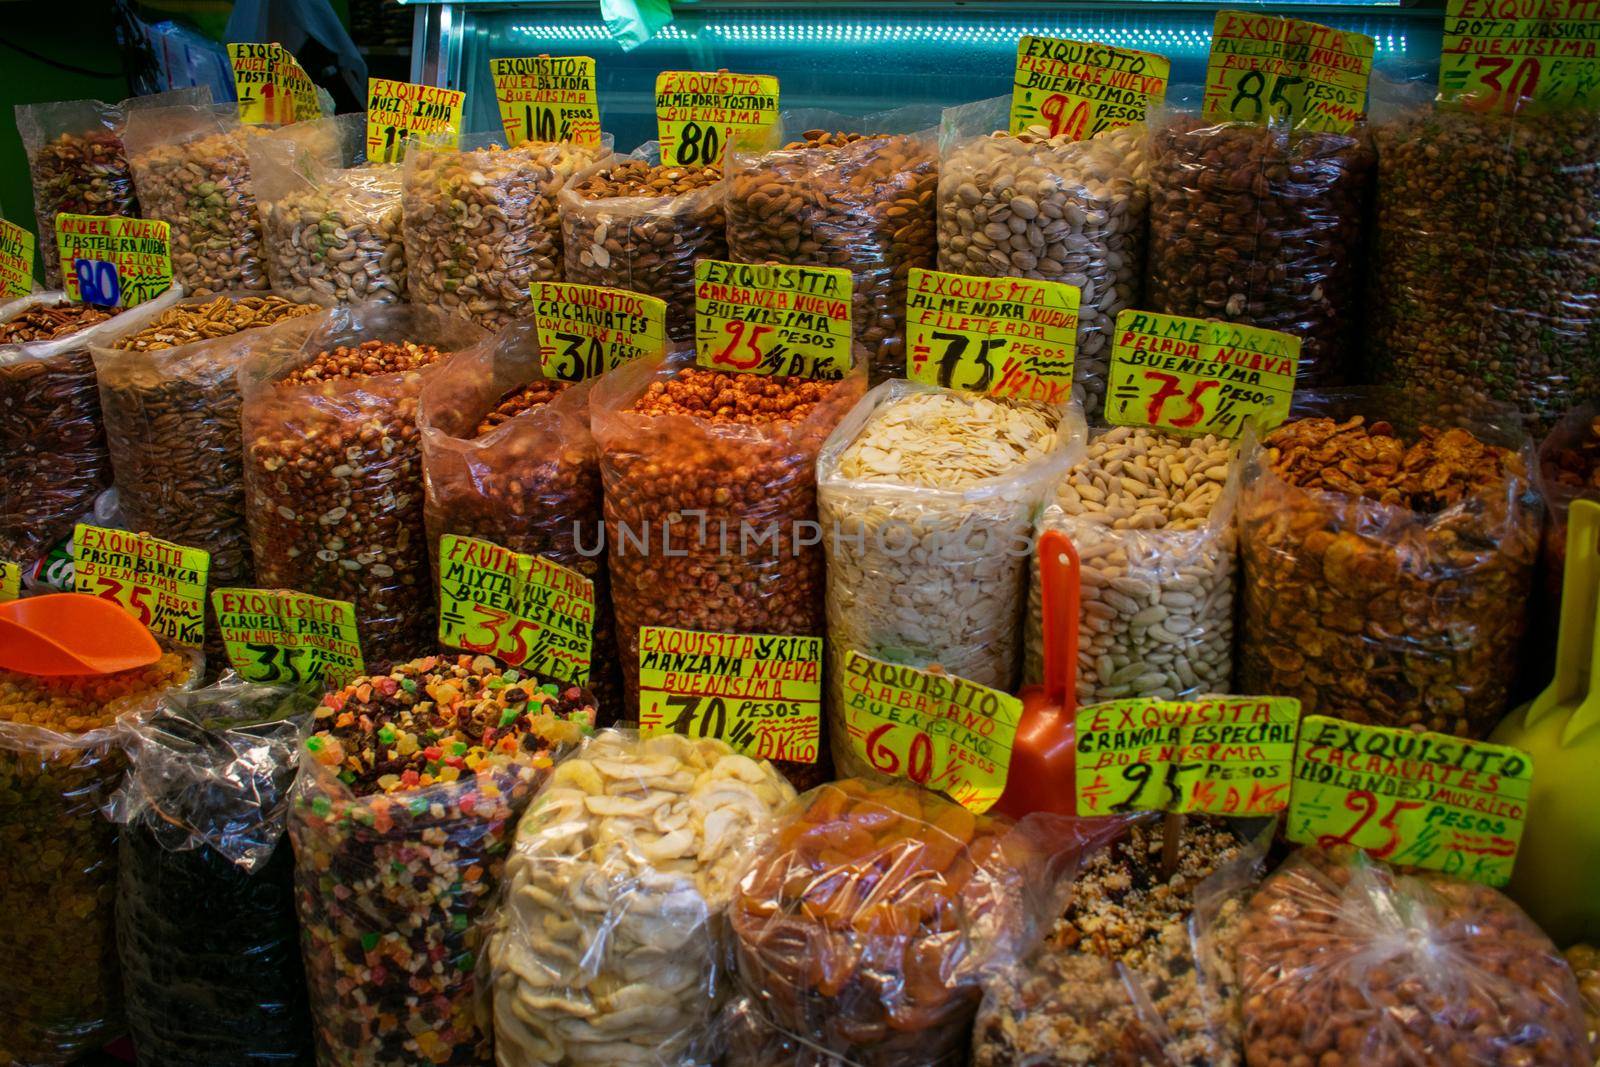 Fresh nuts and dry fruit in plastic bags for sale. Huge variety of nuts displayed with description and price tags in Mexican market. Healthy ingredients